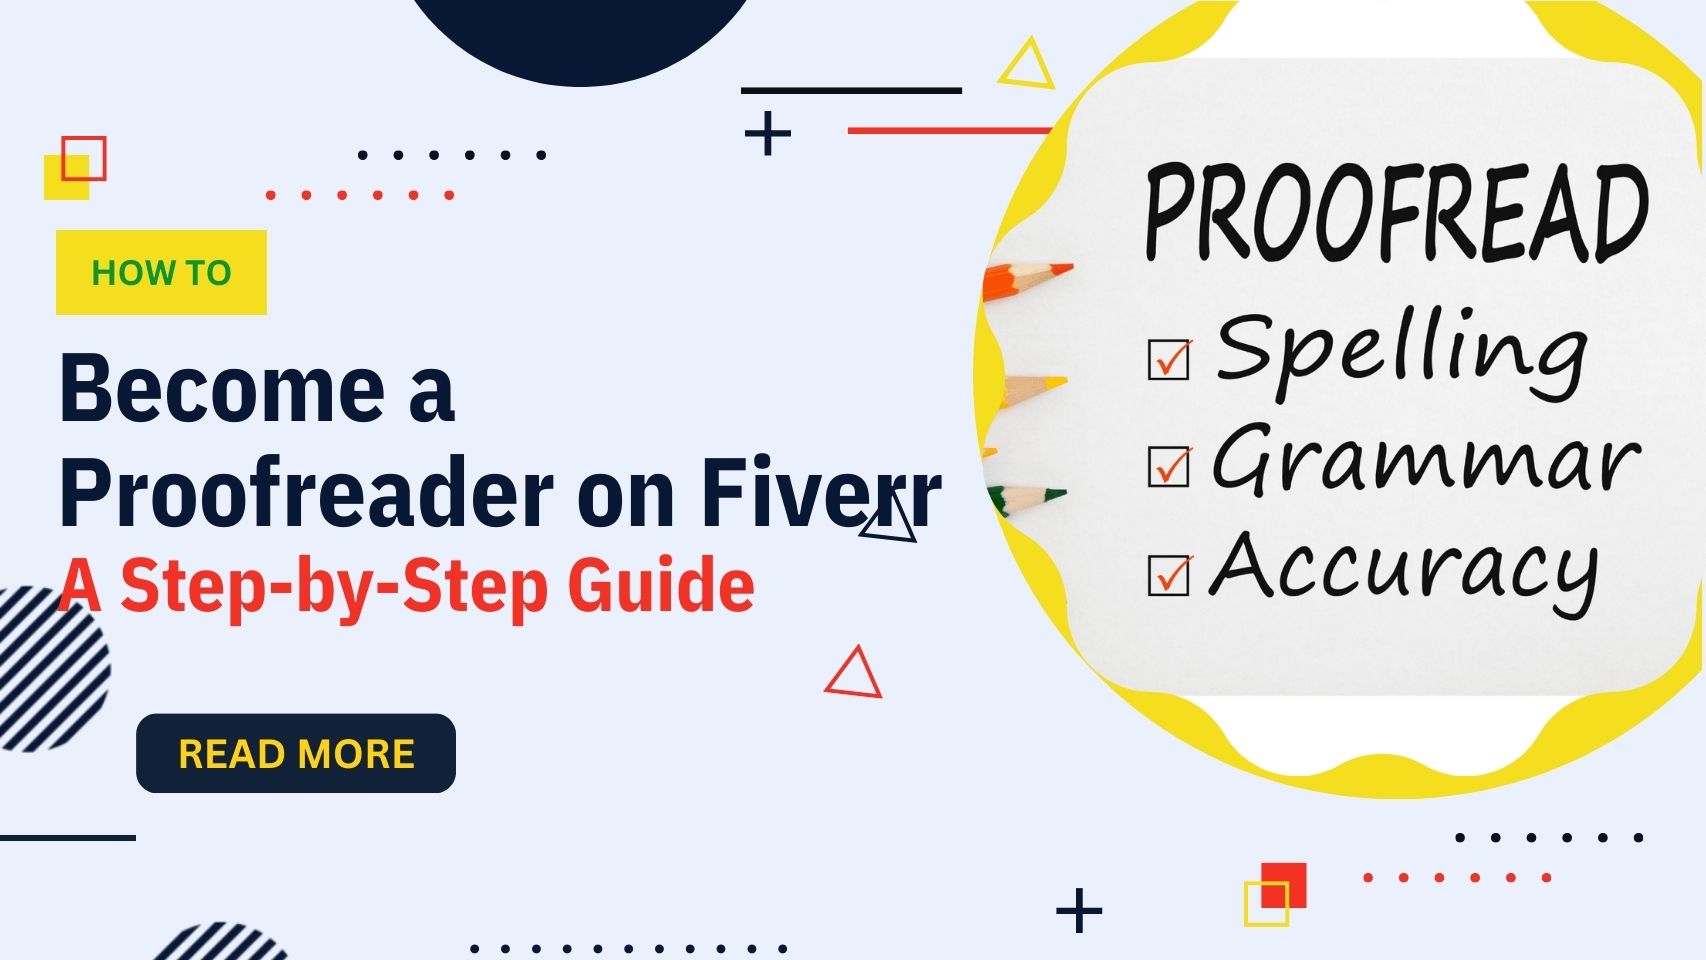 How to Become a Proofreader on Fiverr: A Step-by-Step Guide